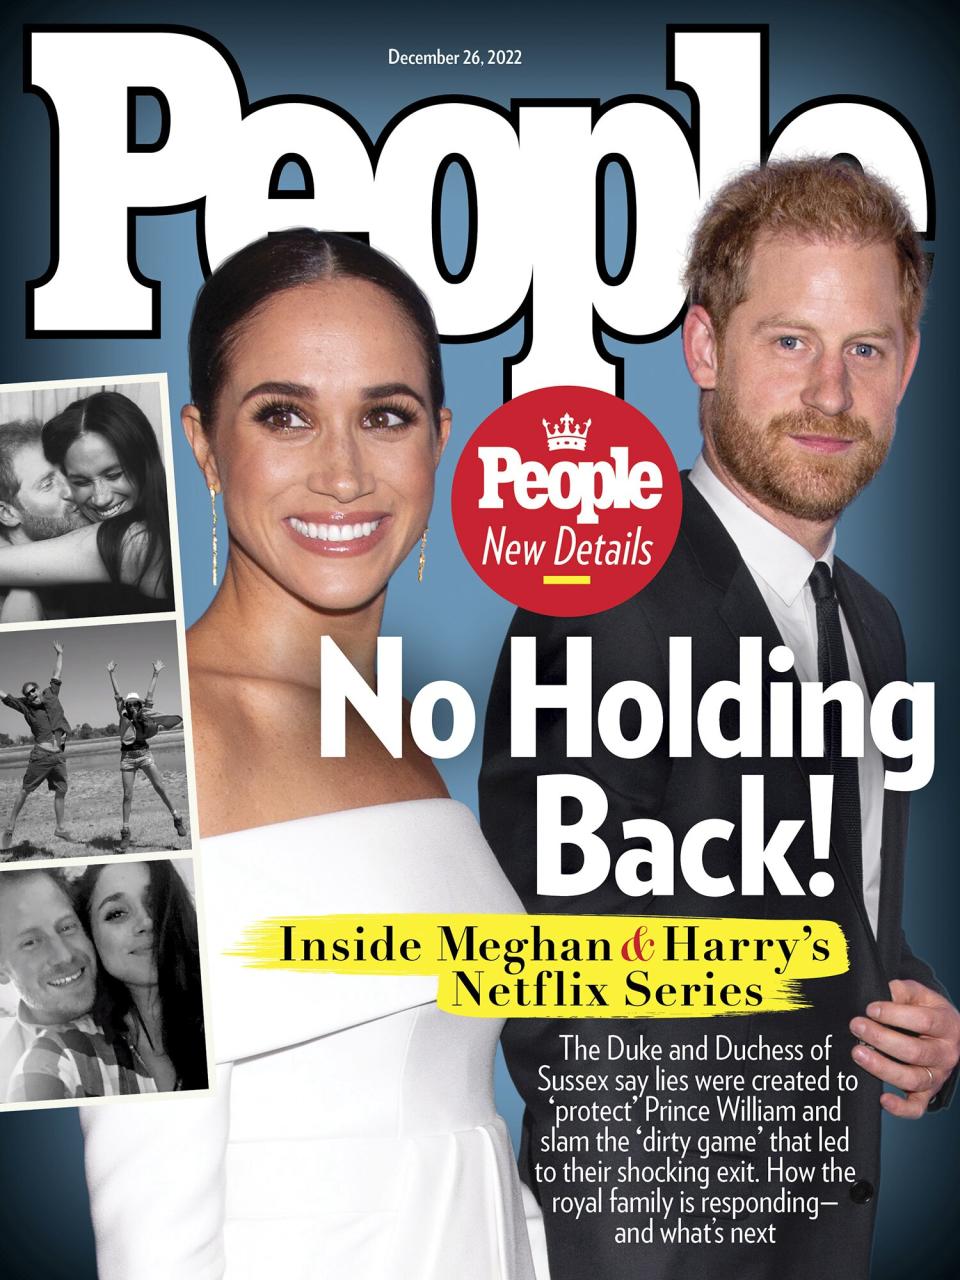 Harry and Meghan rollout